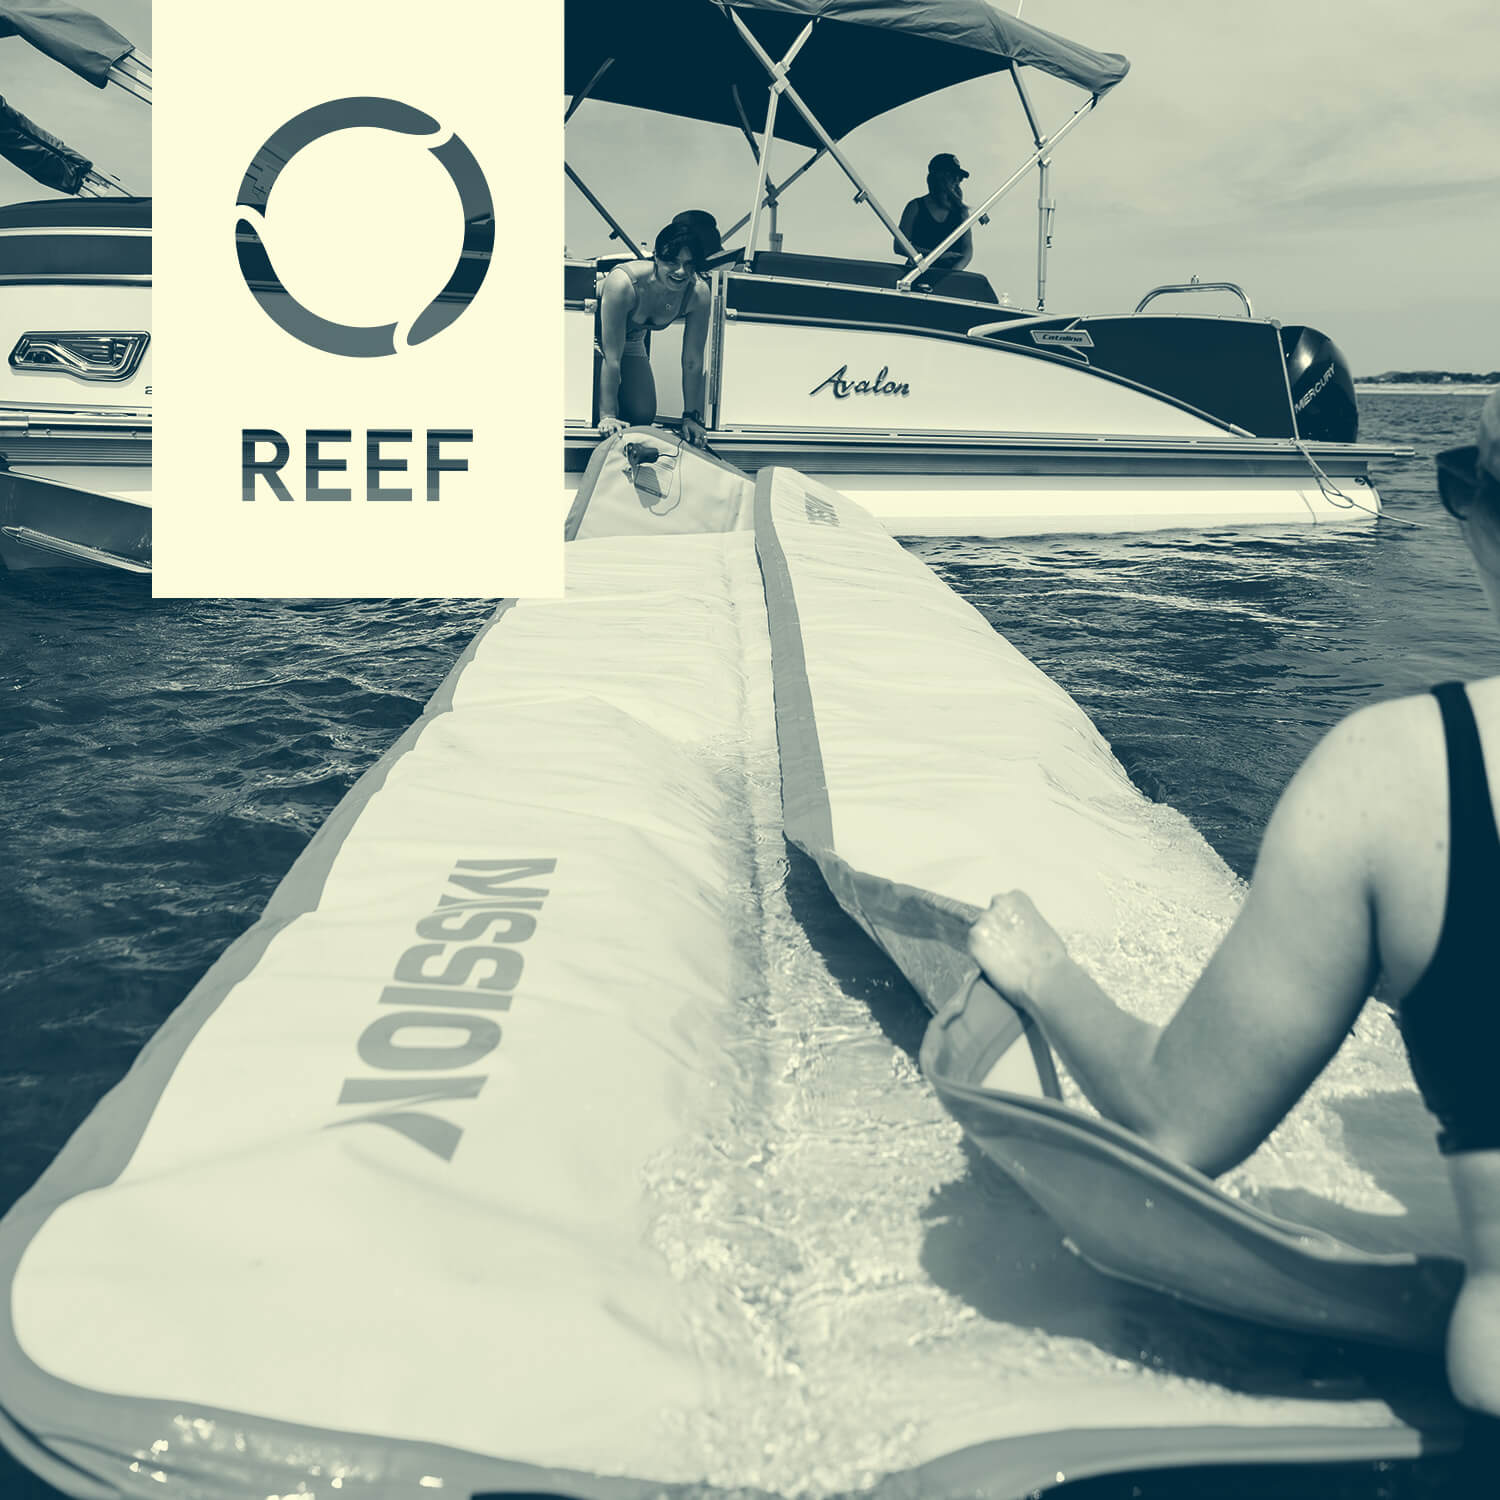 How to Fold up a MISSION Reef Mat From the Boat